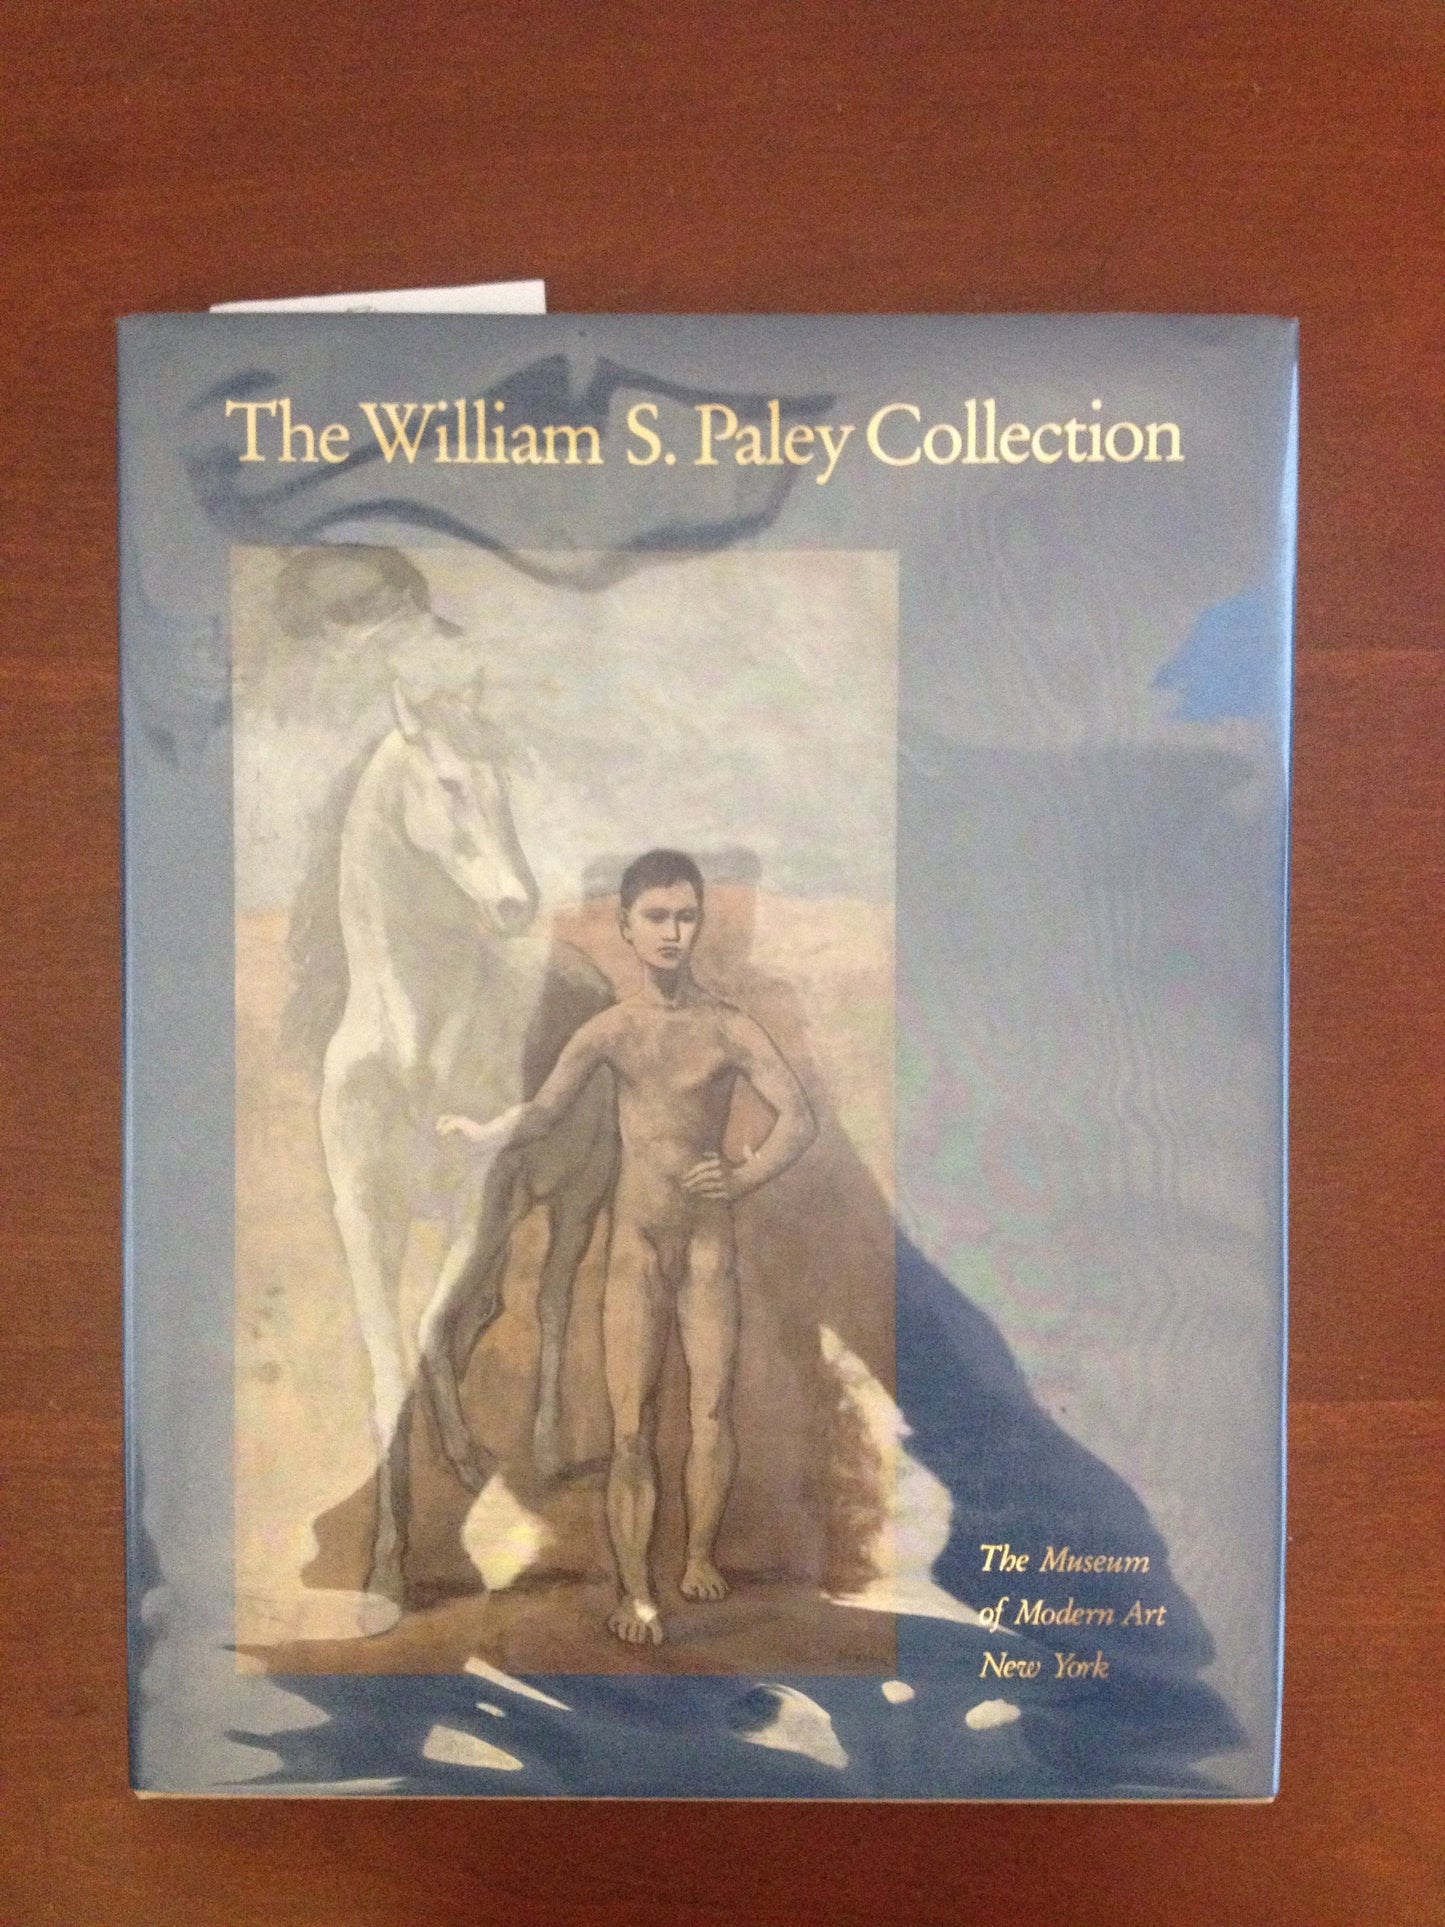 WILLIAM S. PALEY COLLECTION BY: WILLIAM RUBIN MATTHEW ARMSTRONG BooksCardsNBikes